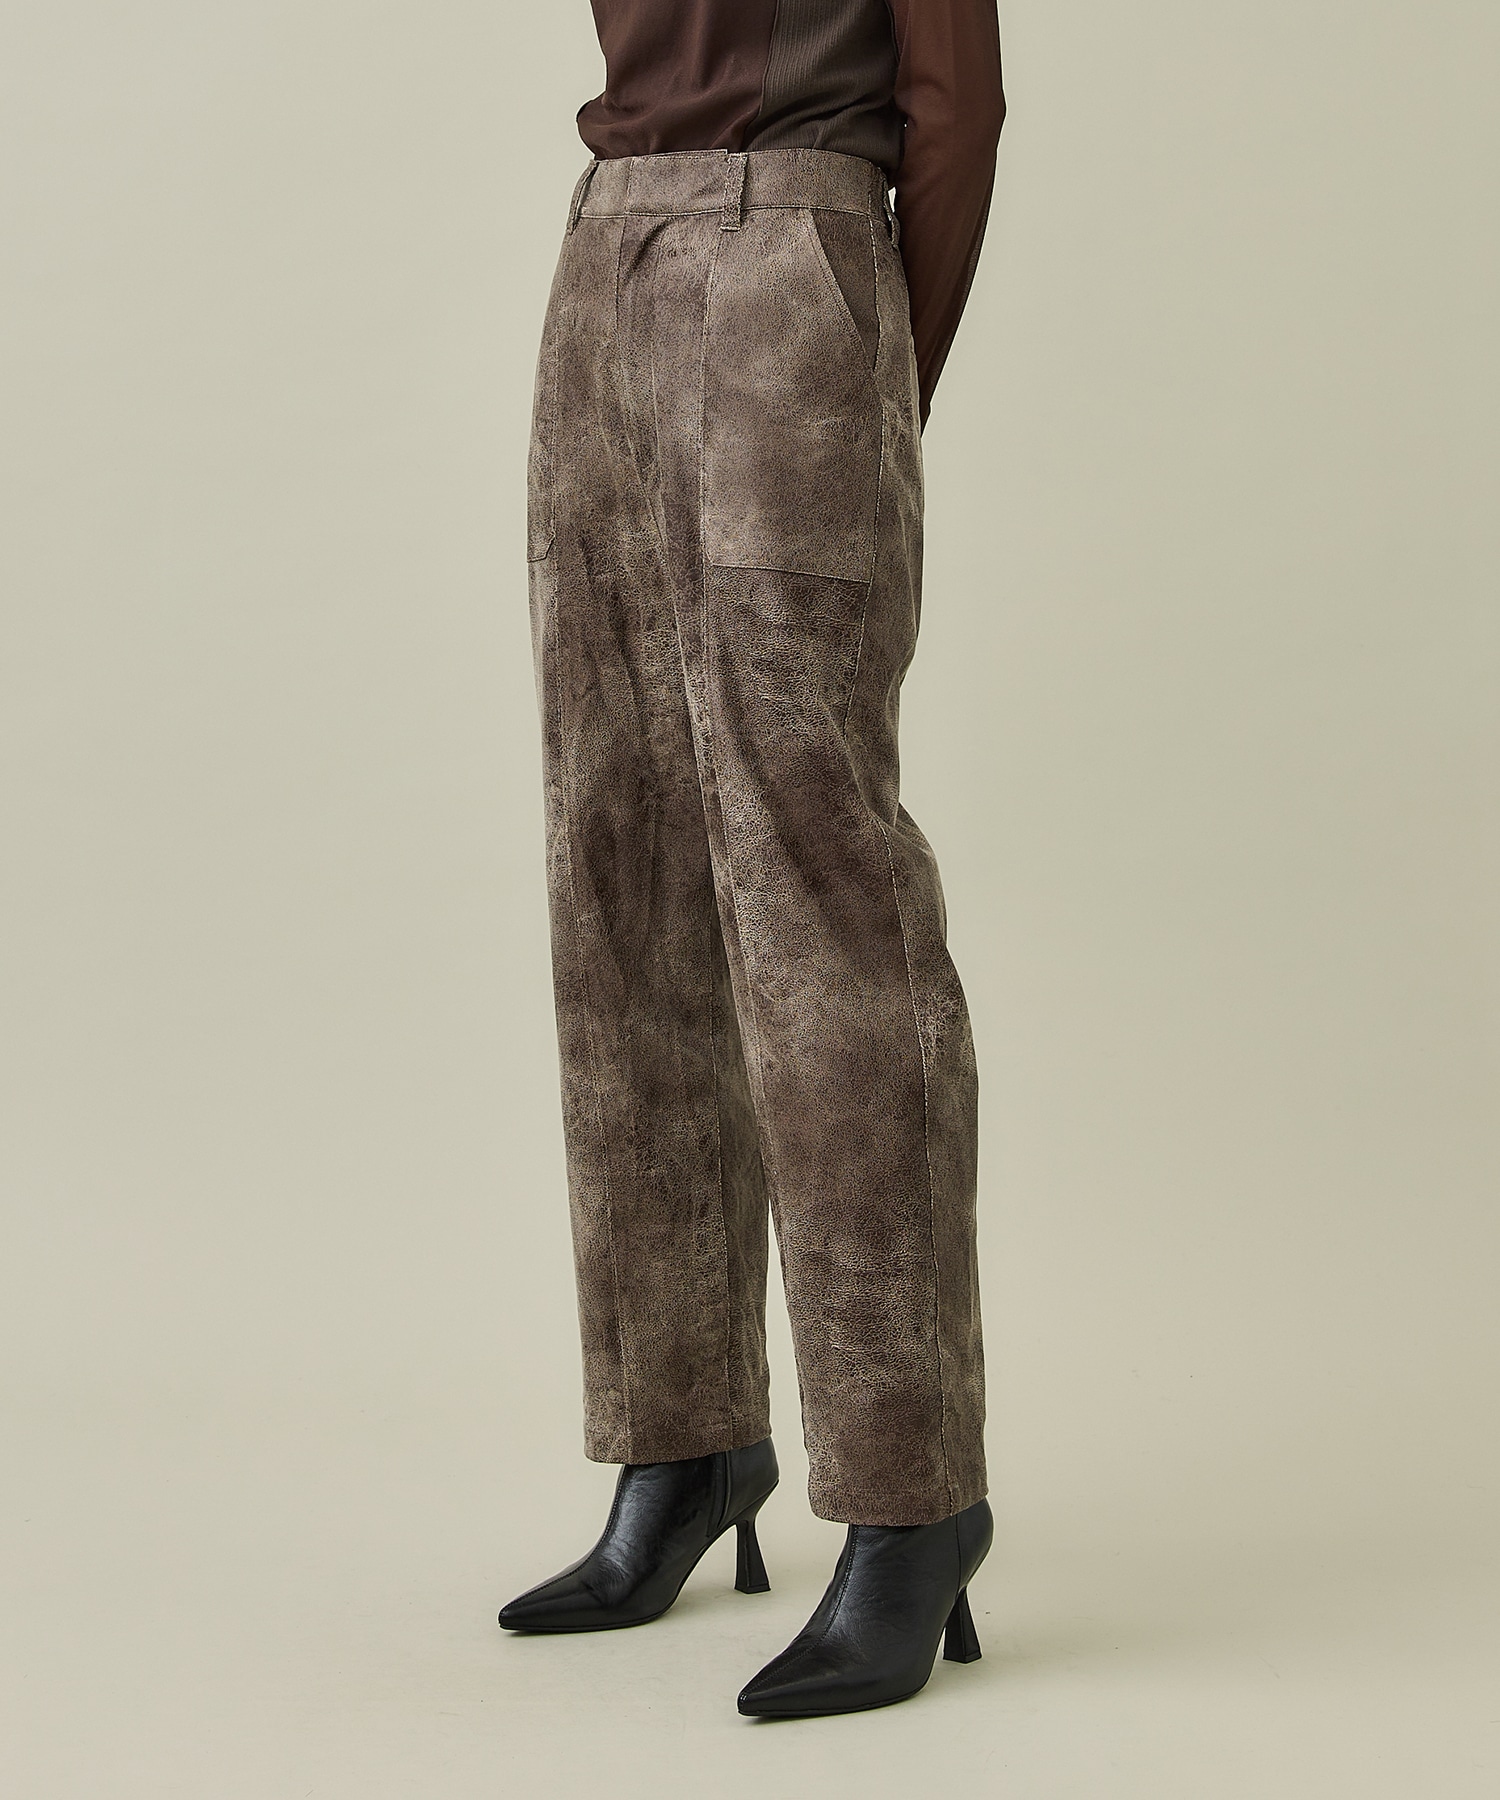 AMERIVINTAGE CRUSHED LEATHER RELAX PANTS